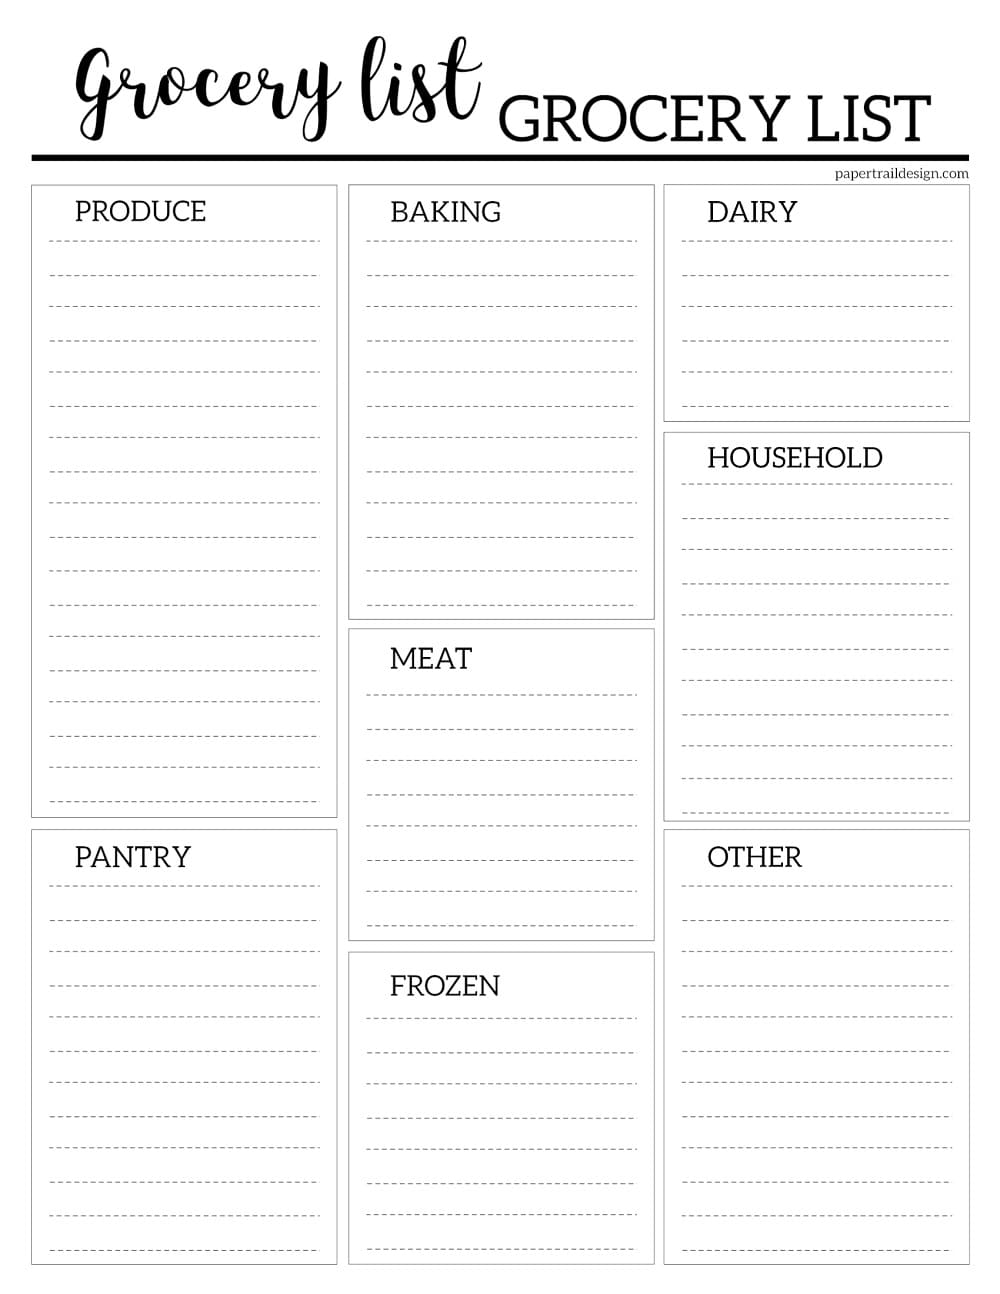 Grocery List Template Image